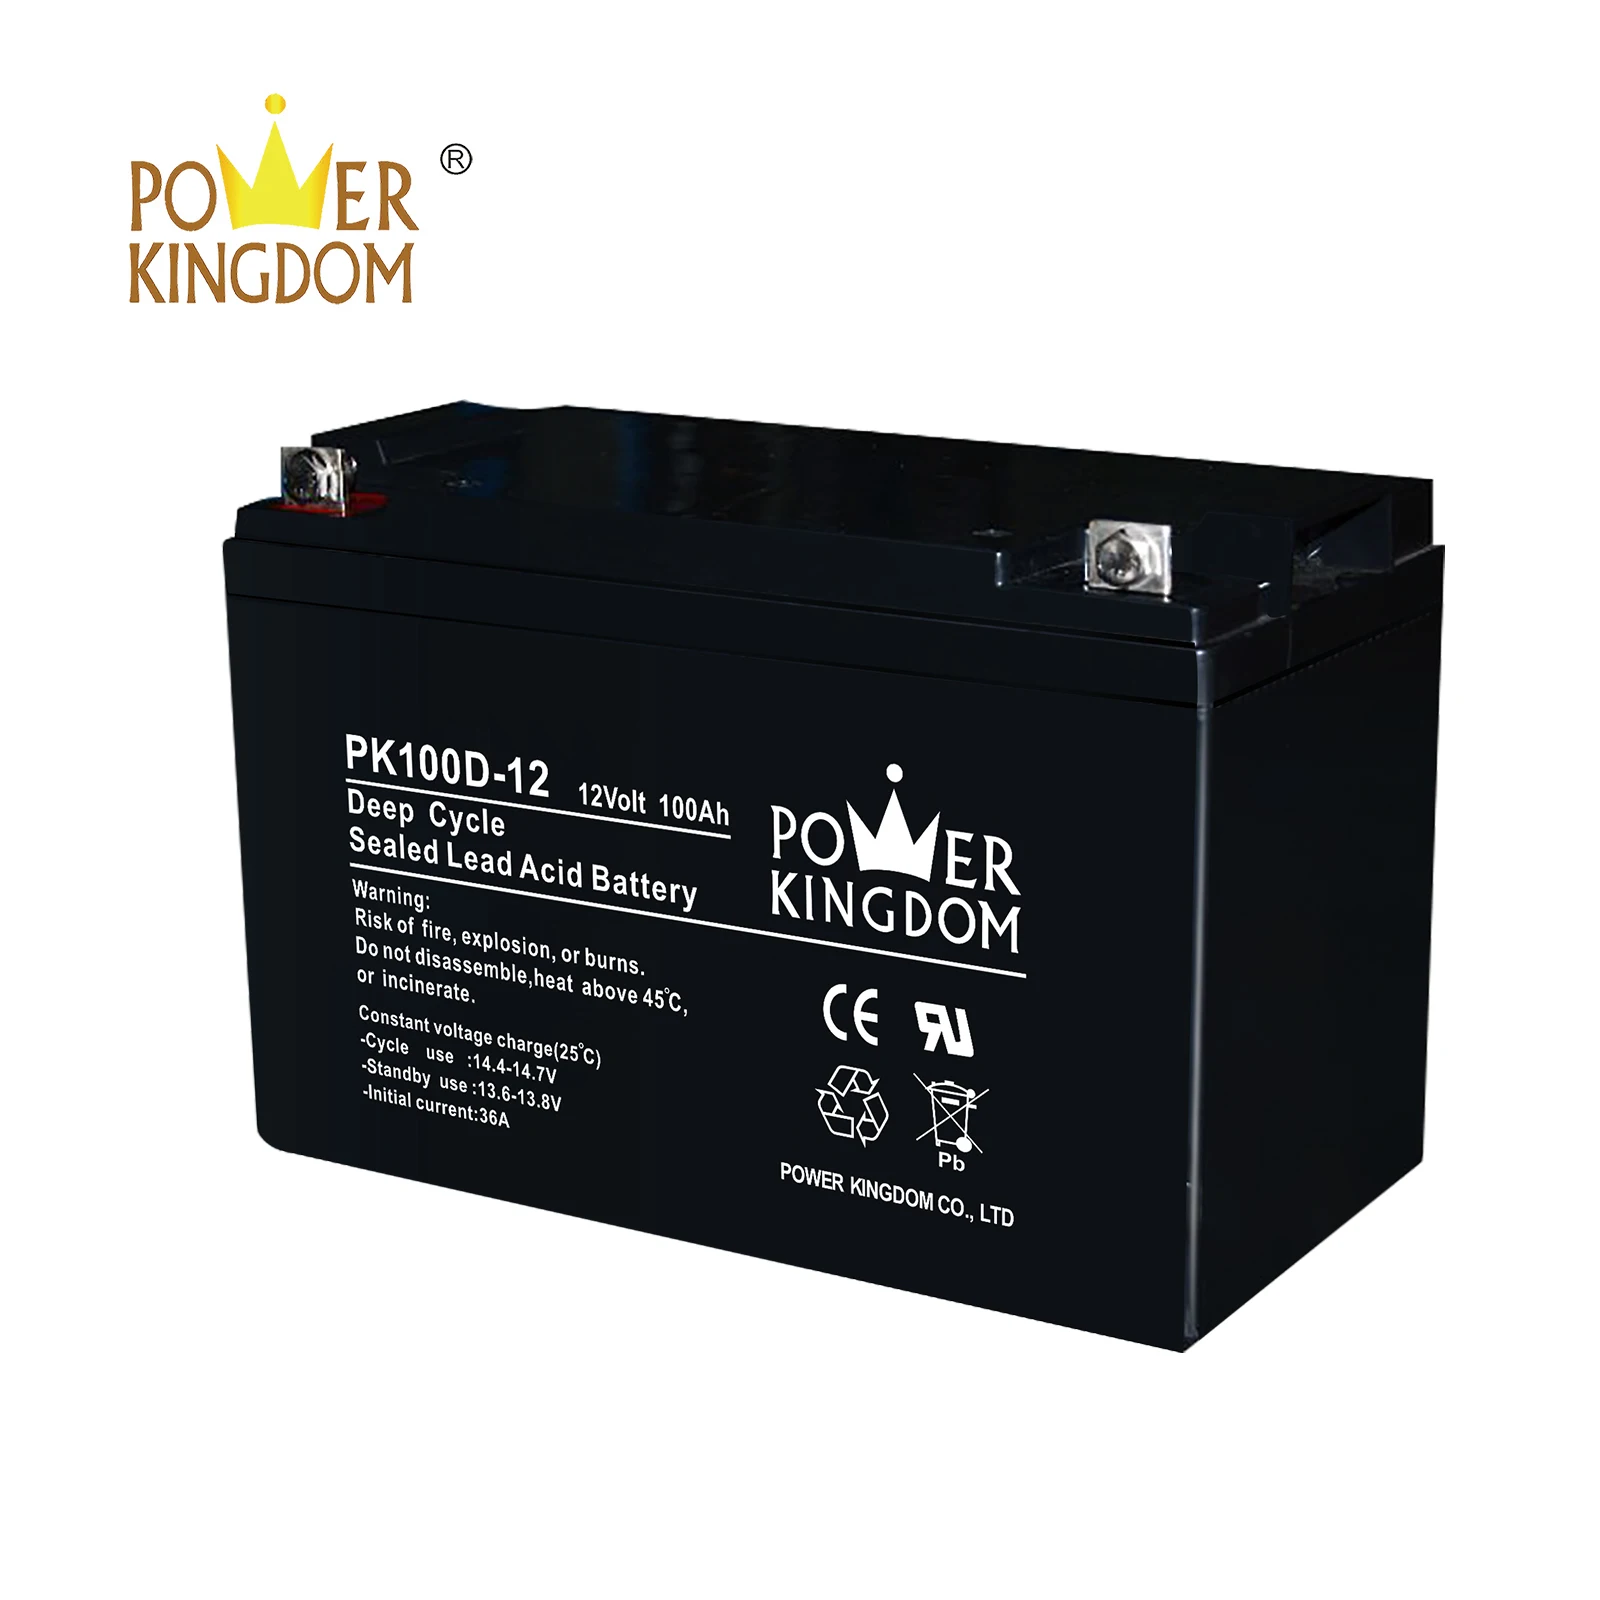 Power Kingdom Best 12 volt deep cycle marine battery prices manufacturers wind power systems